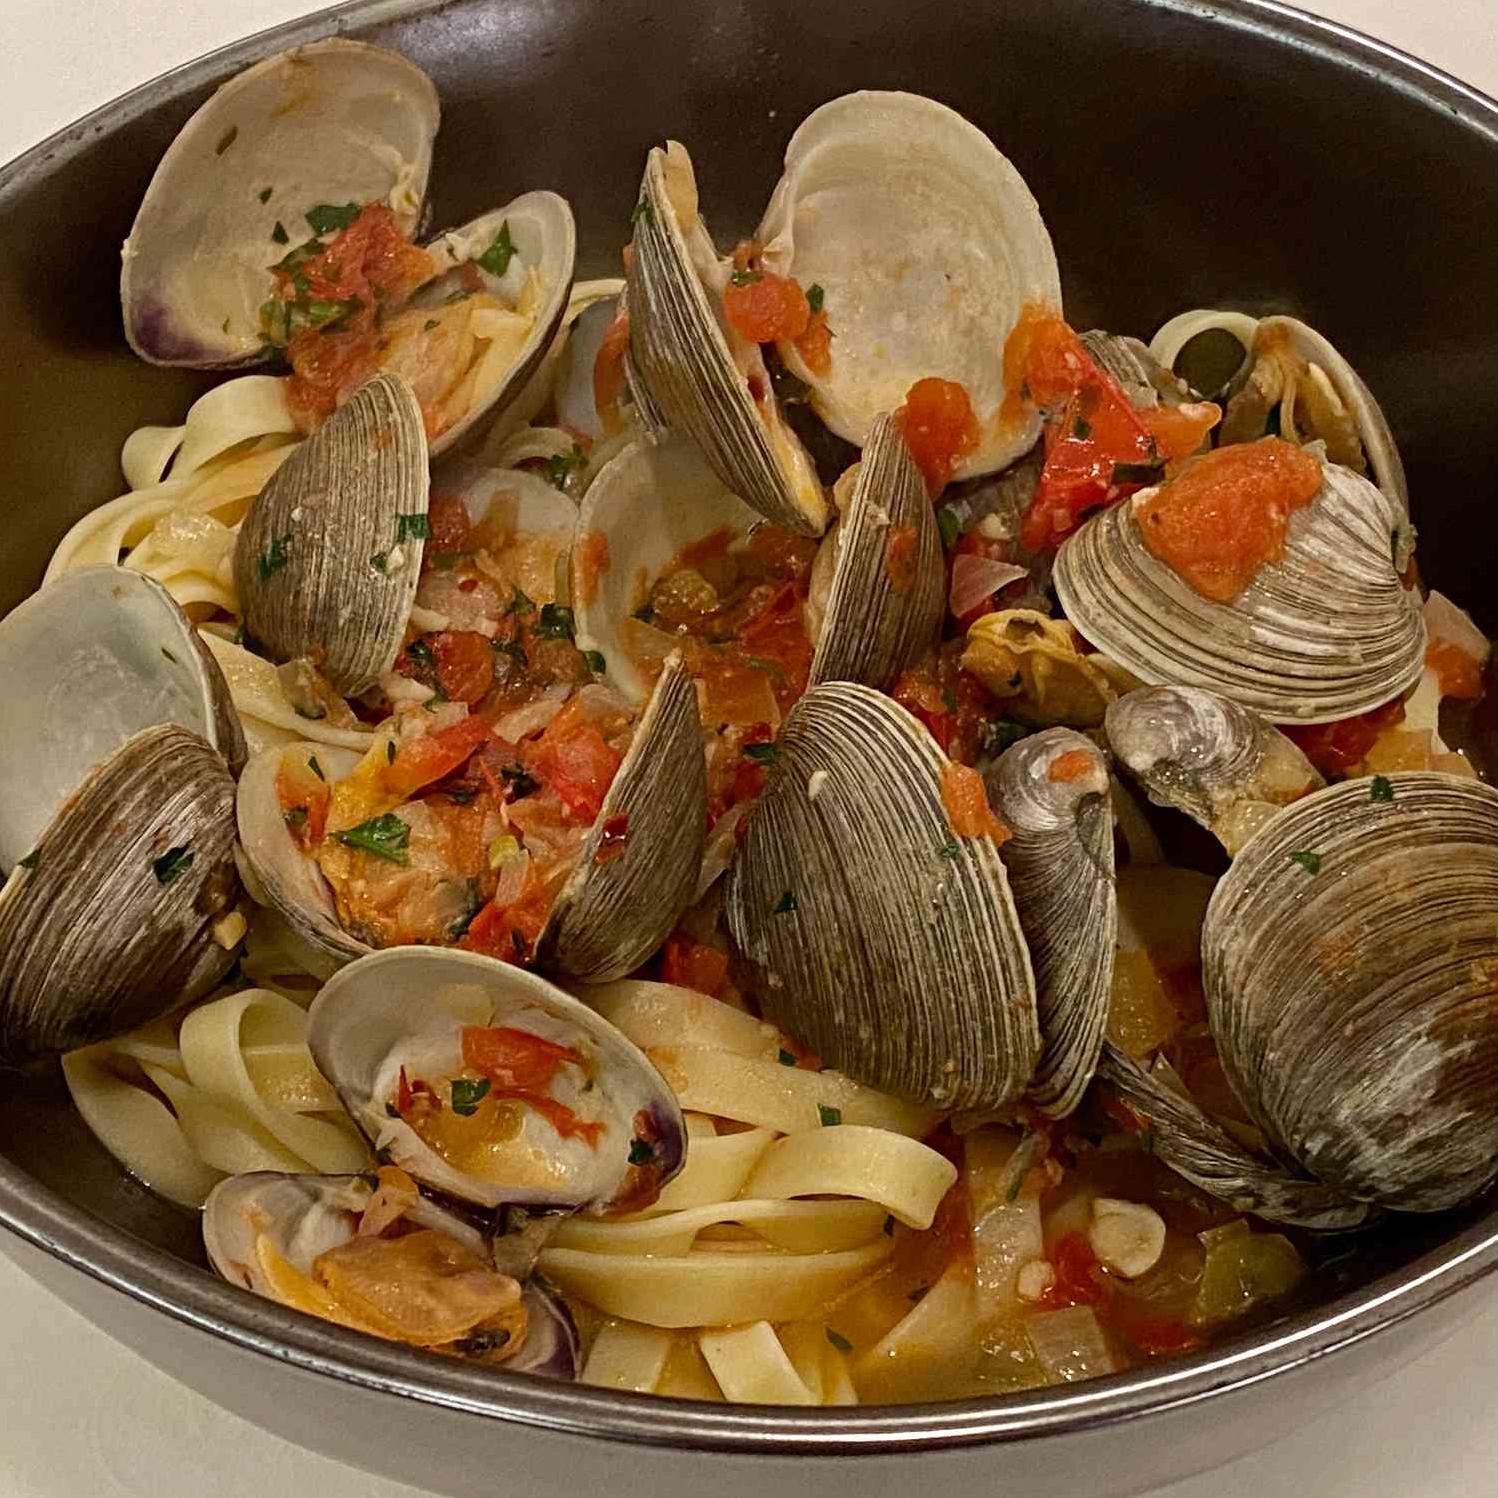  Savor every bite of this delectable pasta and let it transport you to the coastal towns of Italy.